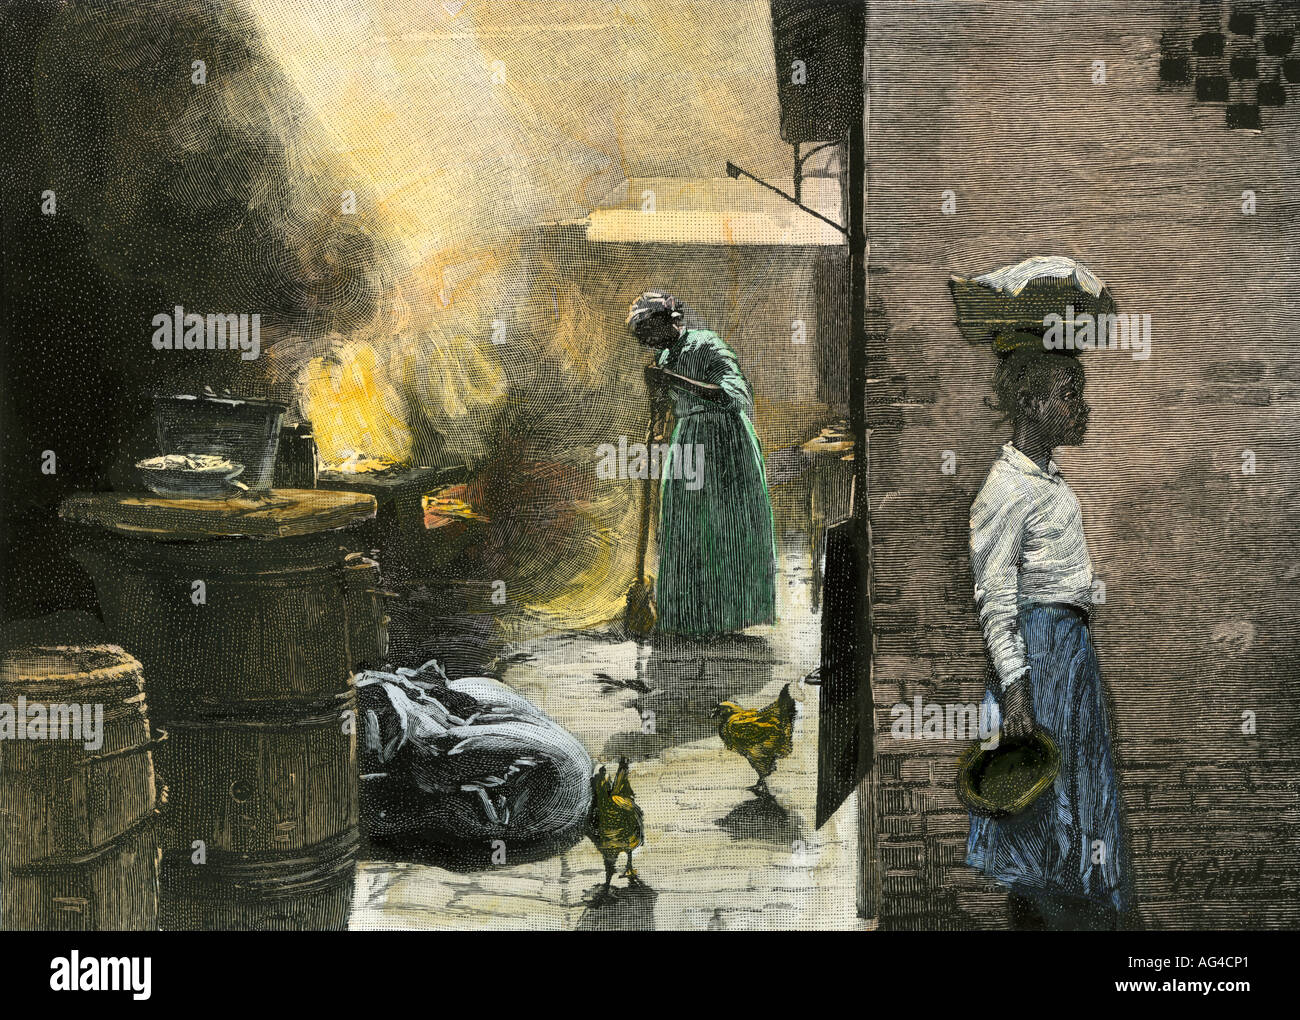 Outdoor kitchen in a Jamaica town 1890s. Hand-colored halftone of an illustration Stock Photo